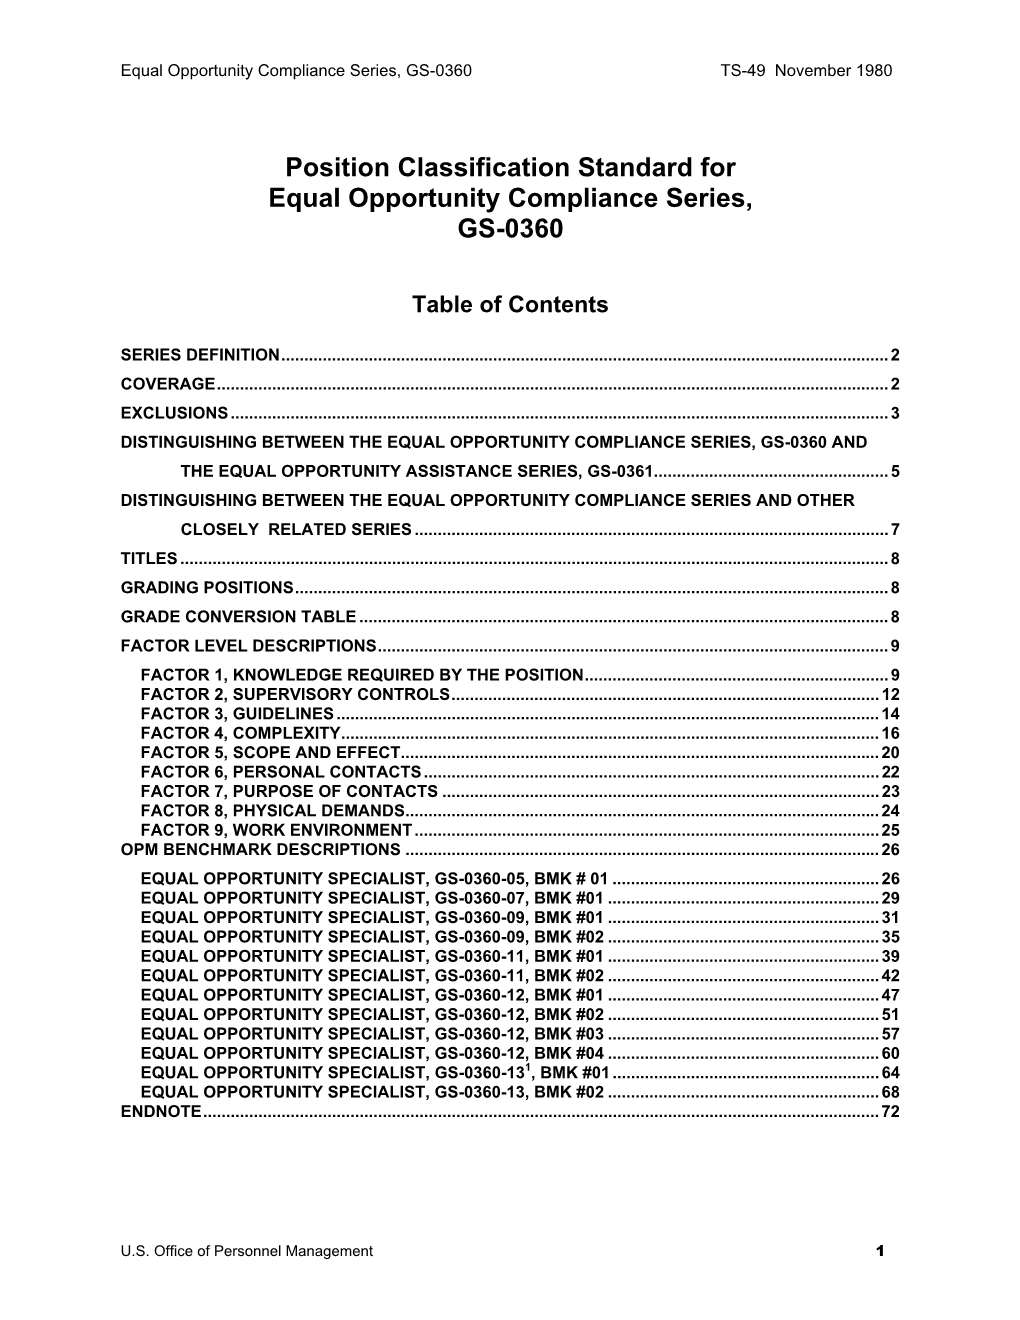 Position Classification Standard for Equal Opportunity Compliance Series, GS-0360